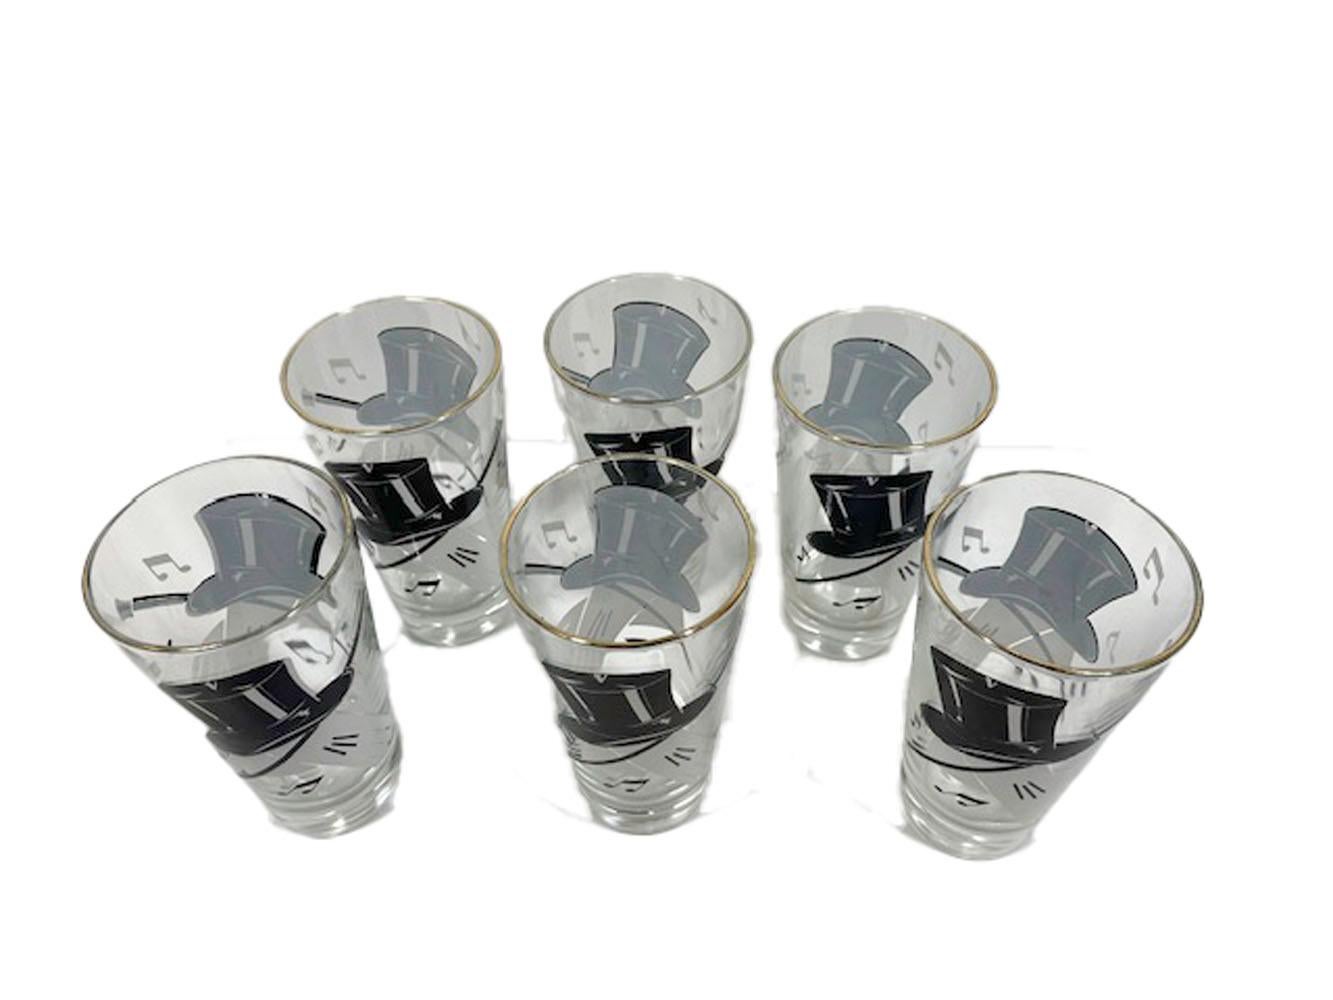 Set of six Art Deco highball glasses by Hazel Atlas decorated with top hats, white gloves, canes and music notes in black and white enamel on clear glass.